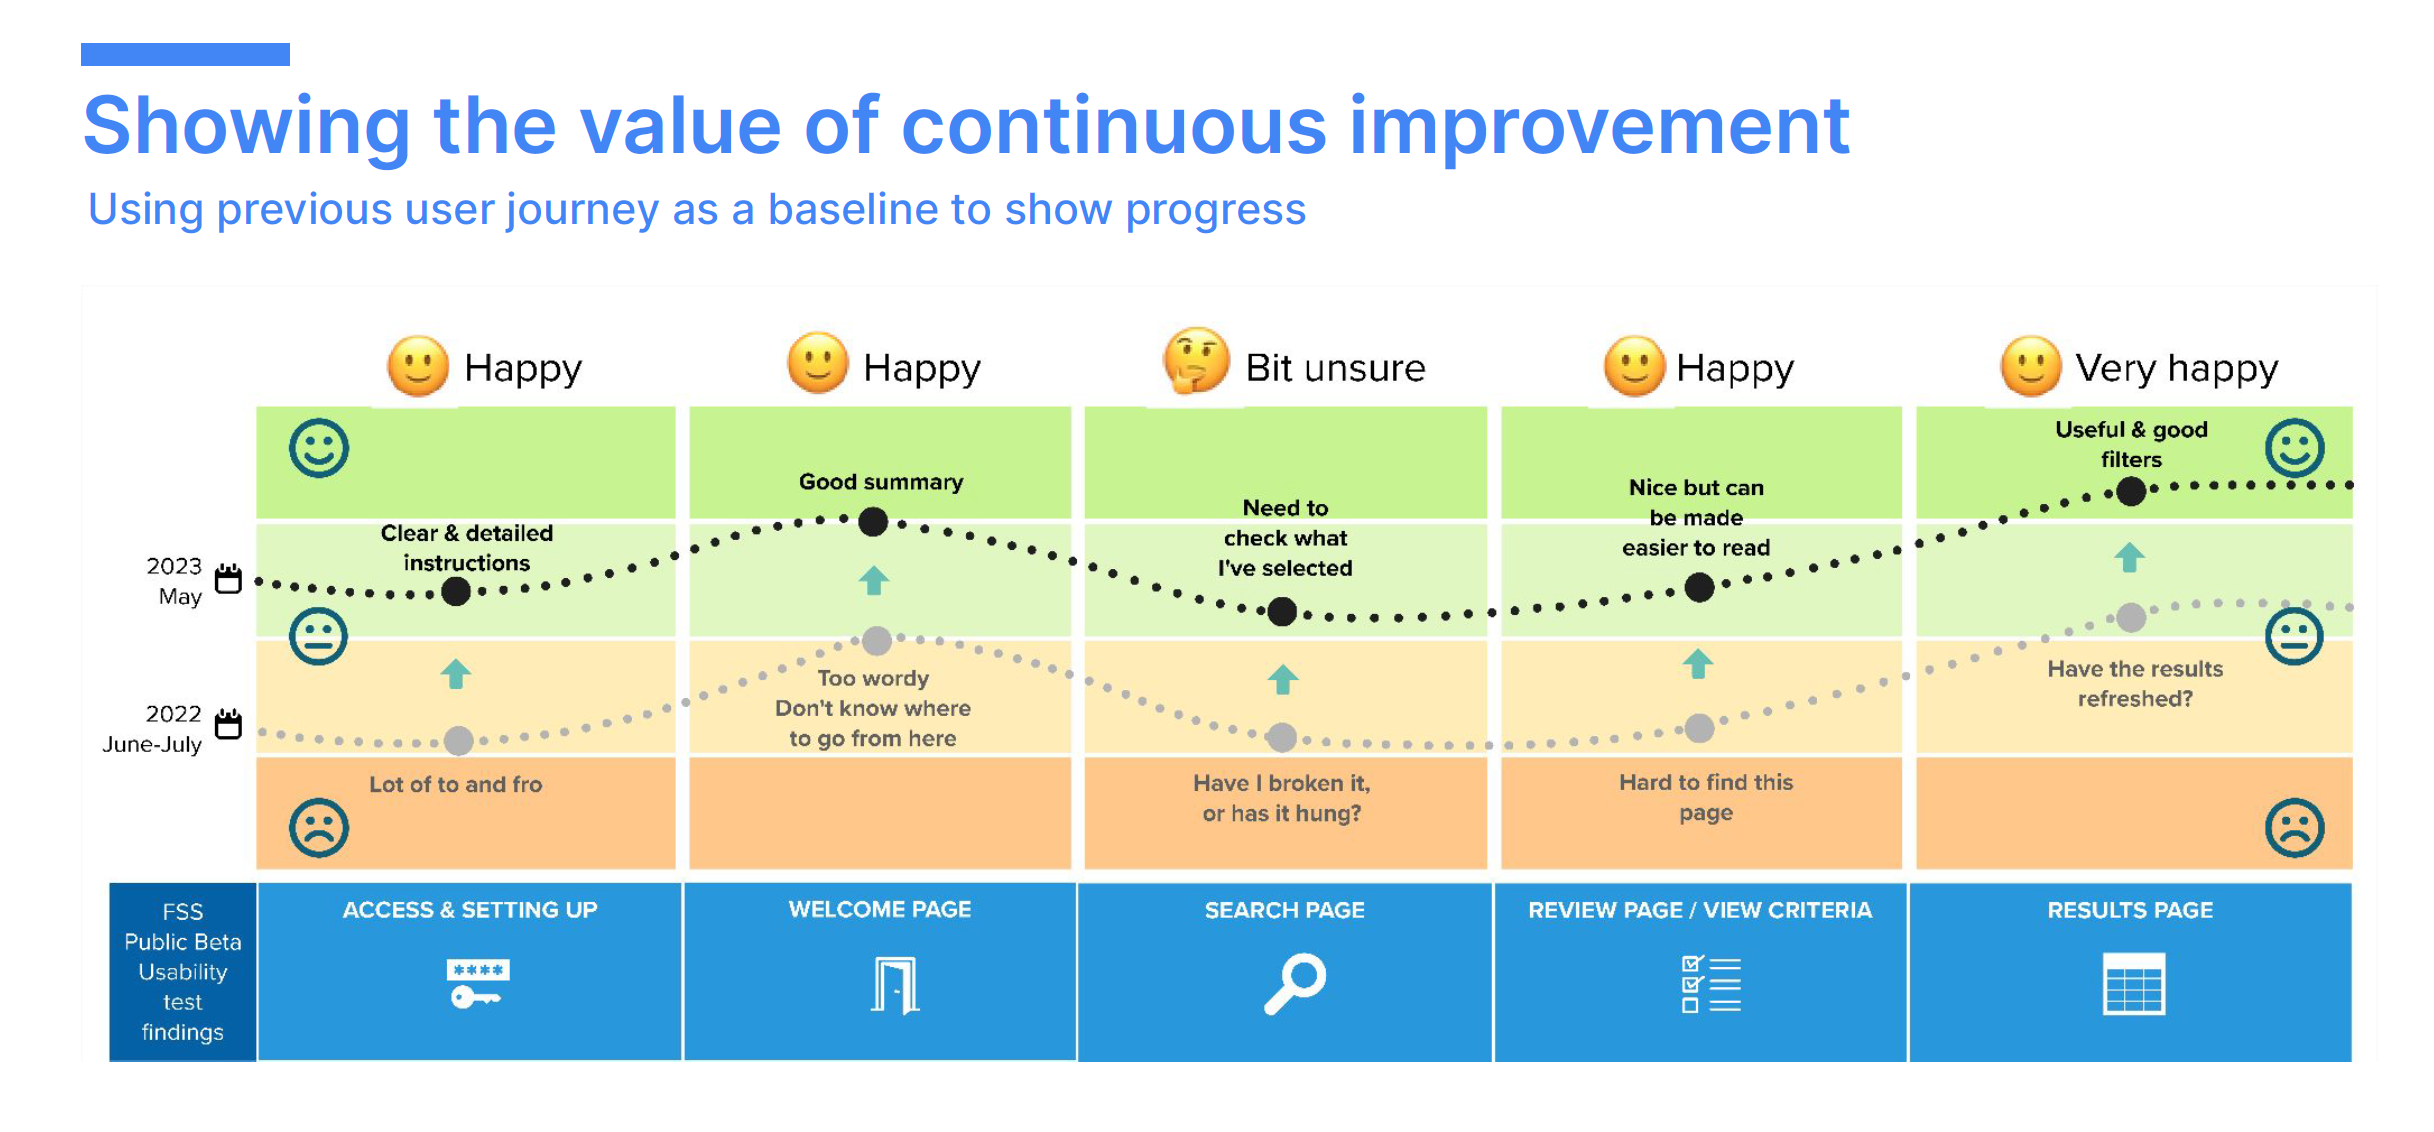 Shows how continuous improvement can increase the value of a user journey on a website. Includes clear and detailed instructions, useful filters and being able to check what has been selected